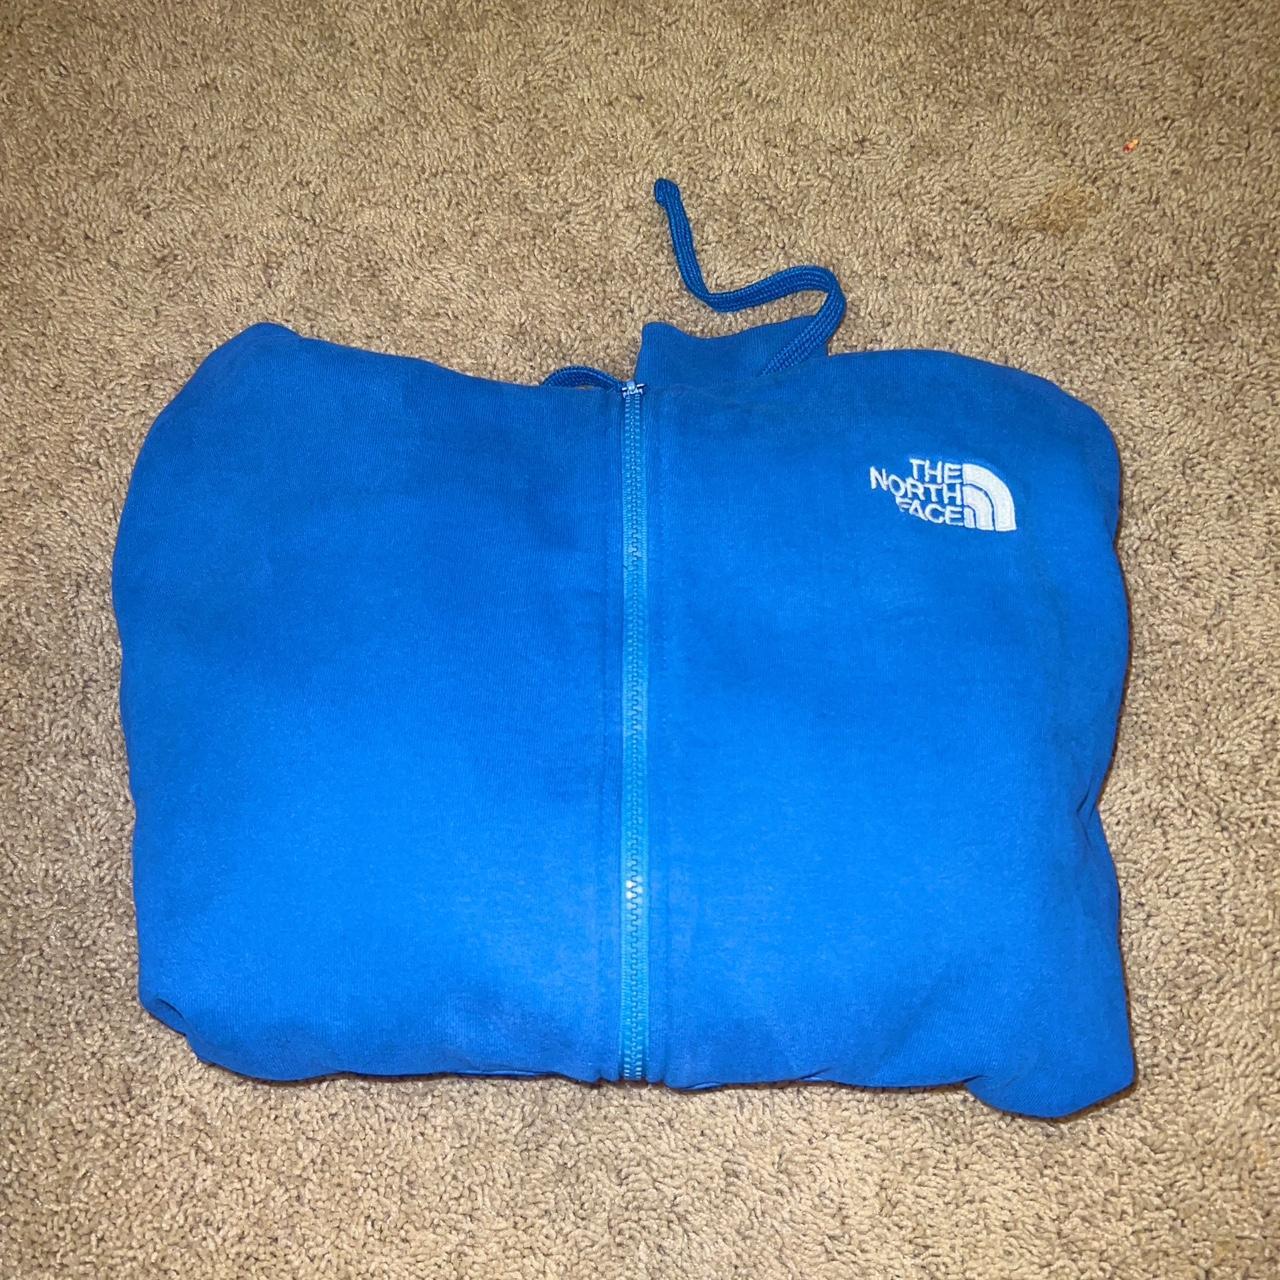 Royal blue north face zip down - size large but fits... - Depop